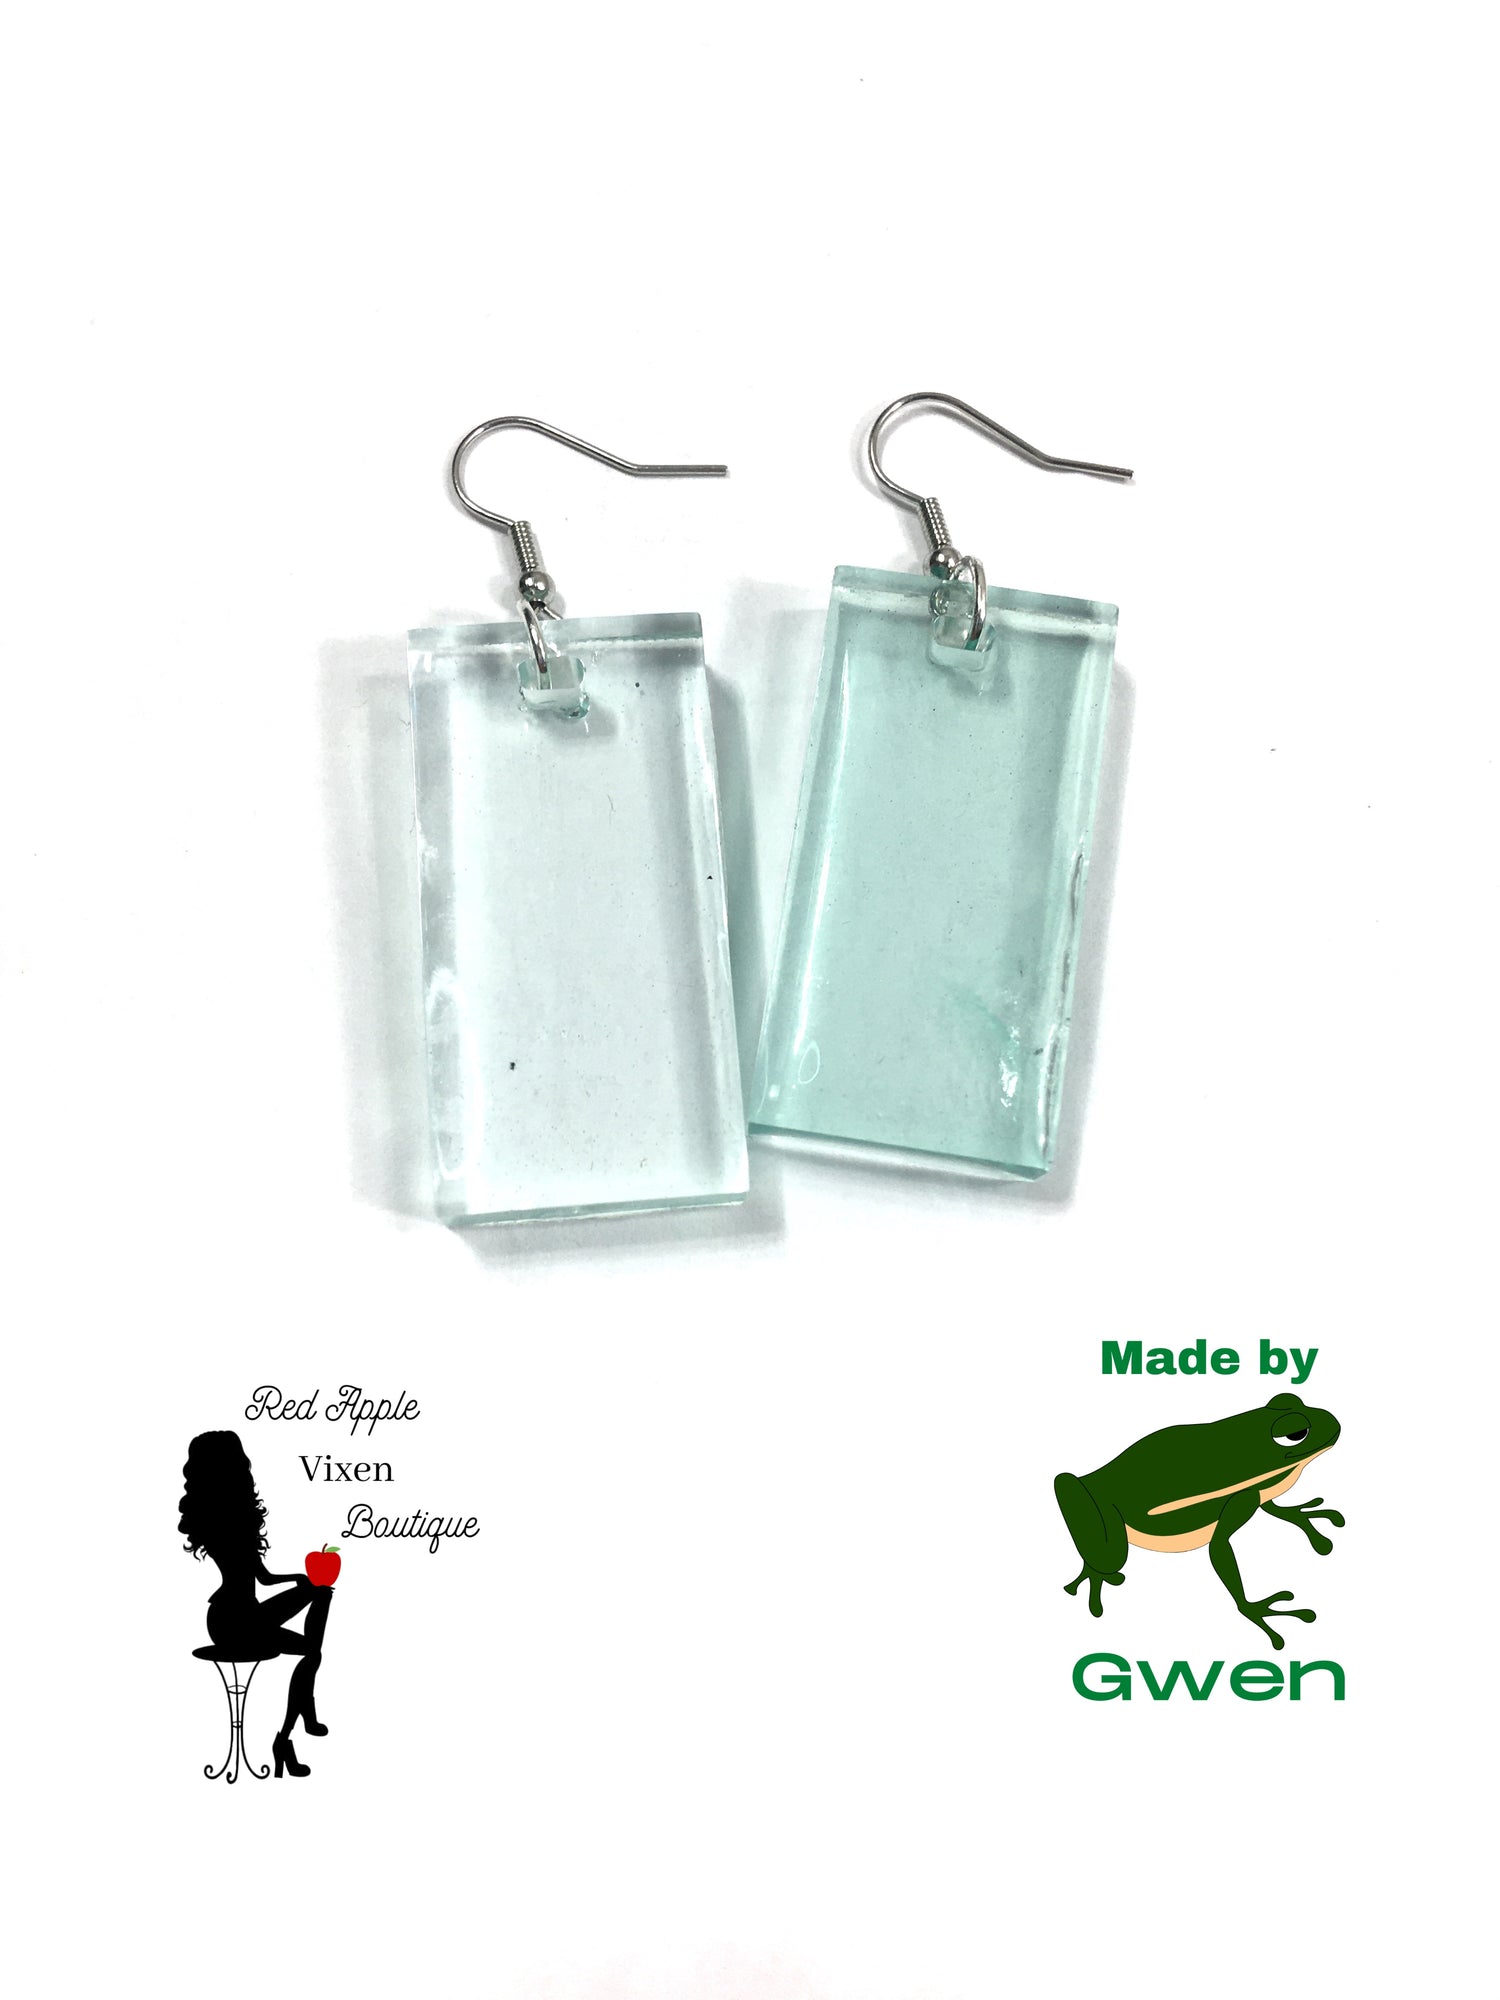 Light Blue Transparent rectangle shaped earrings. Made from Resin. Silver colored fish hook fasteners. Measures approximately 1.5 inches long and 1 inch wide.